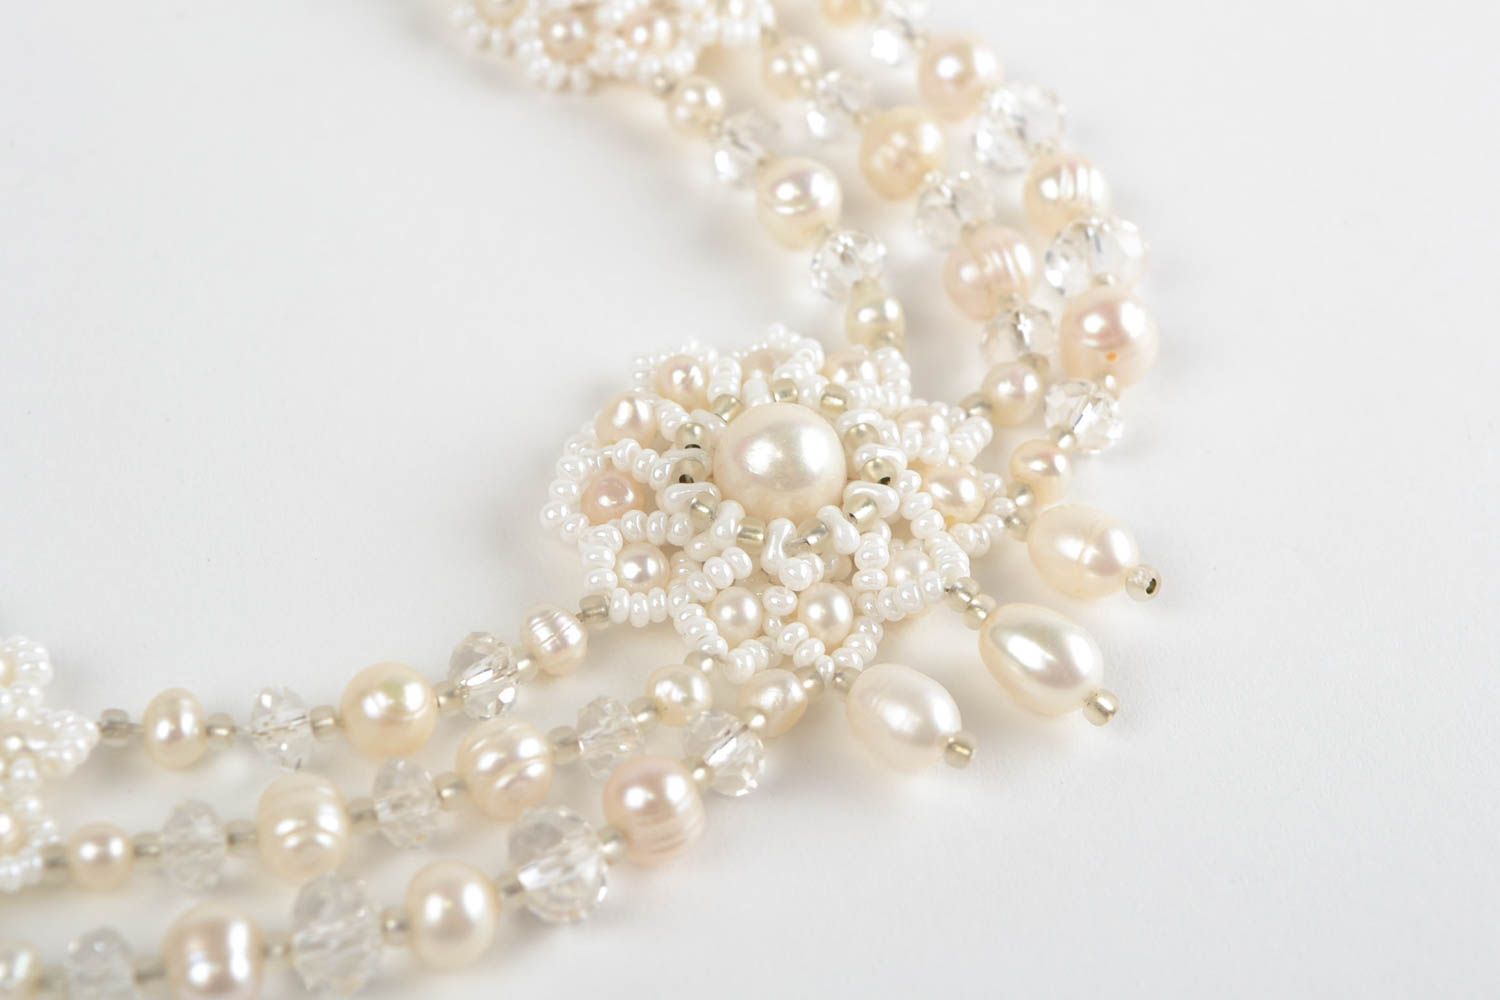 Beautiful festive handmade white necklace made of beads and natural stones photo 3